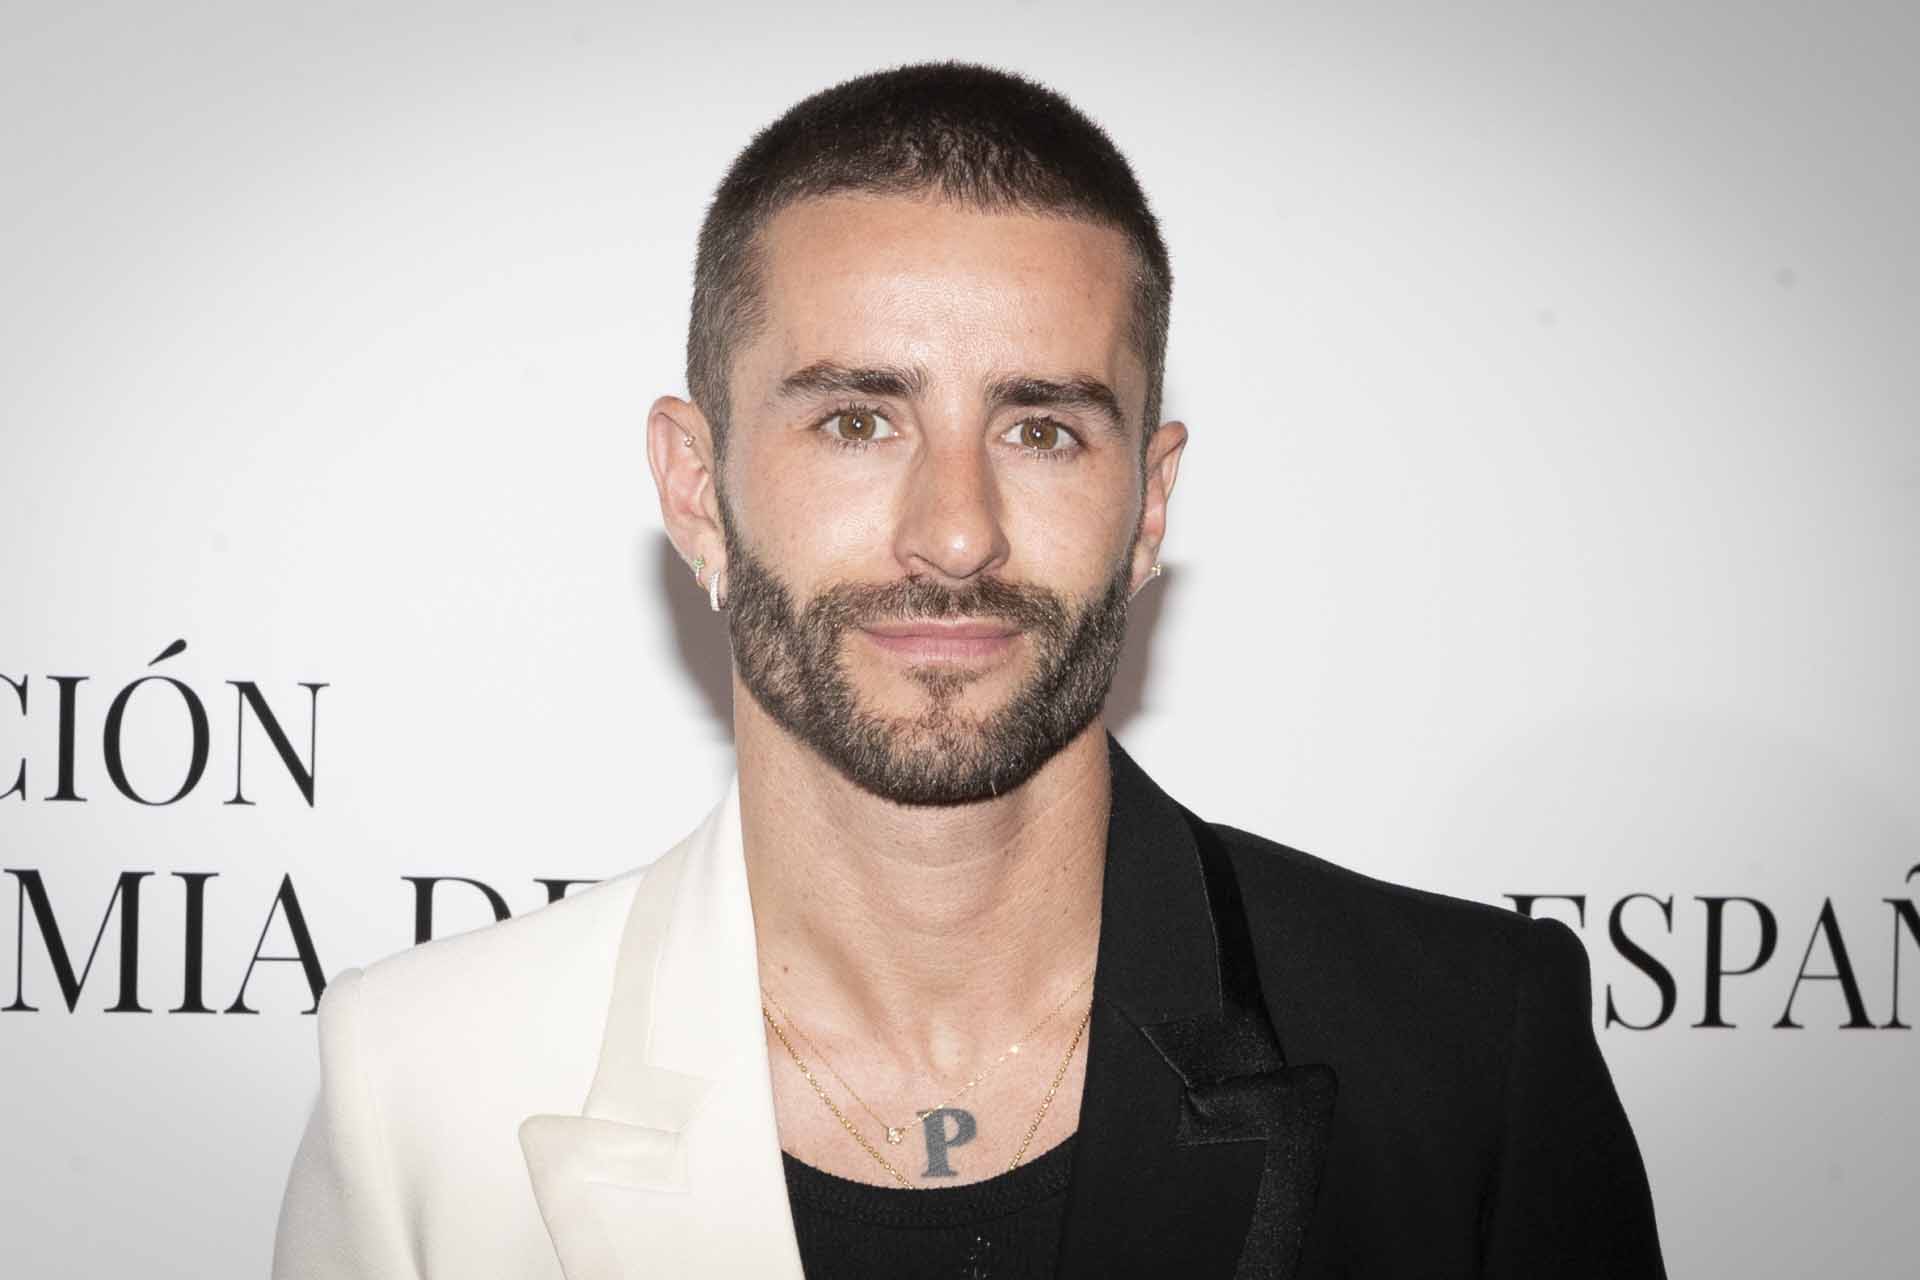 Pelayo Diaz at the presentation photocall of the Spanish Fashion Academy Foundation (FAME) in Madrid on Thursday, May 26, 2022.